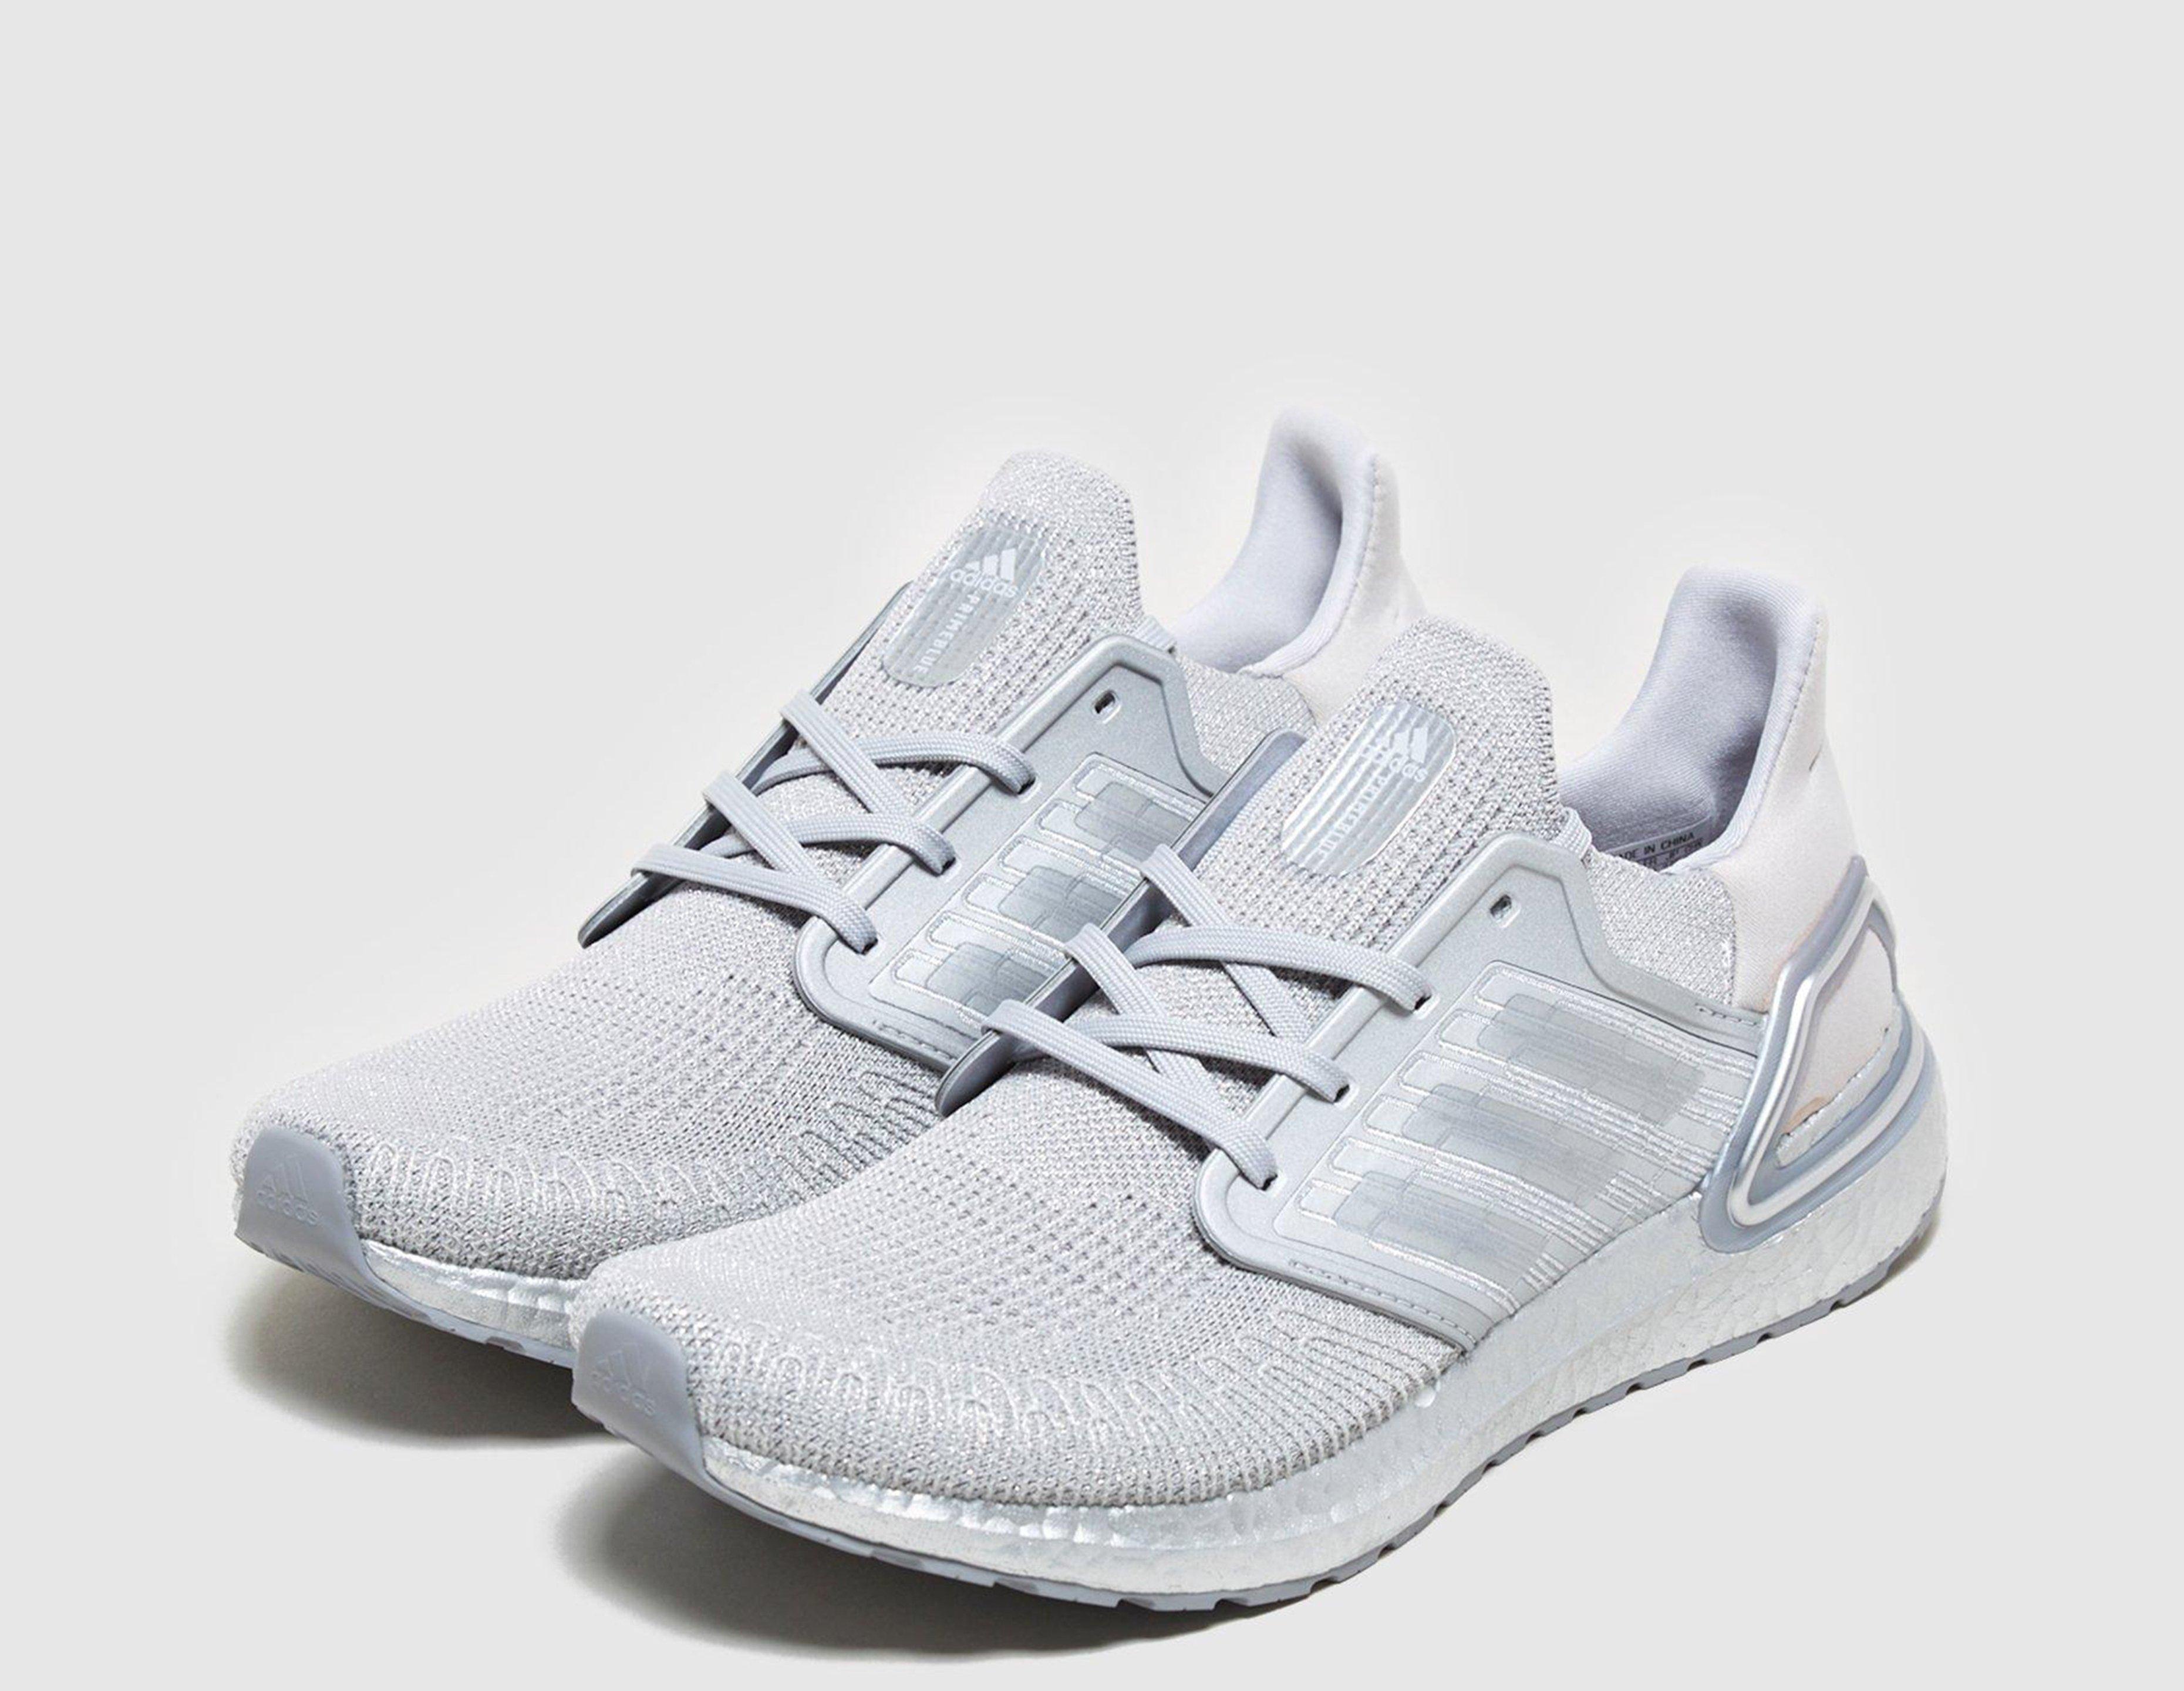 adidas boost materiale